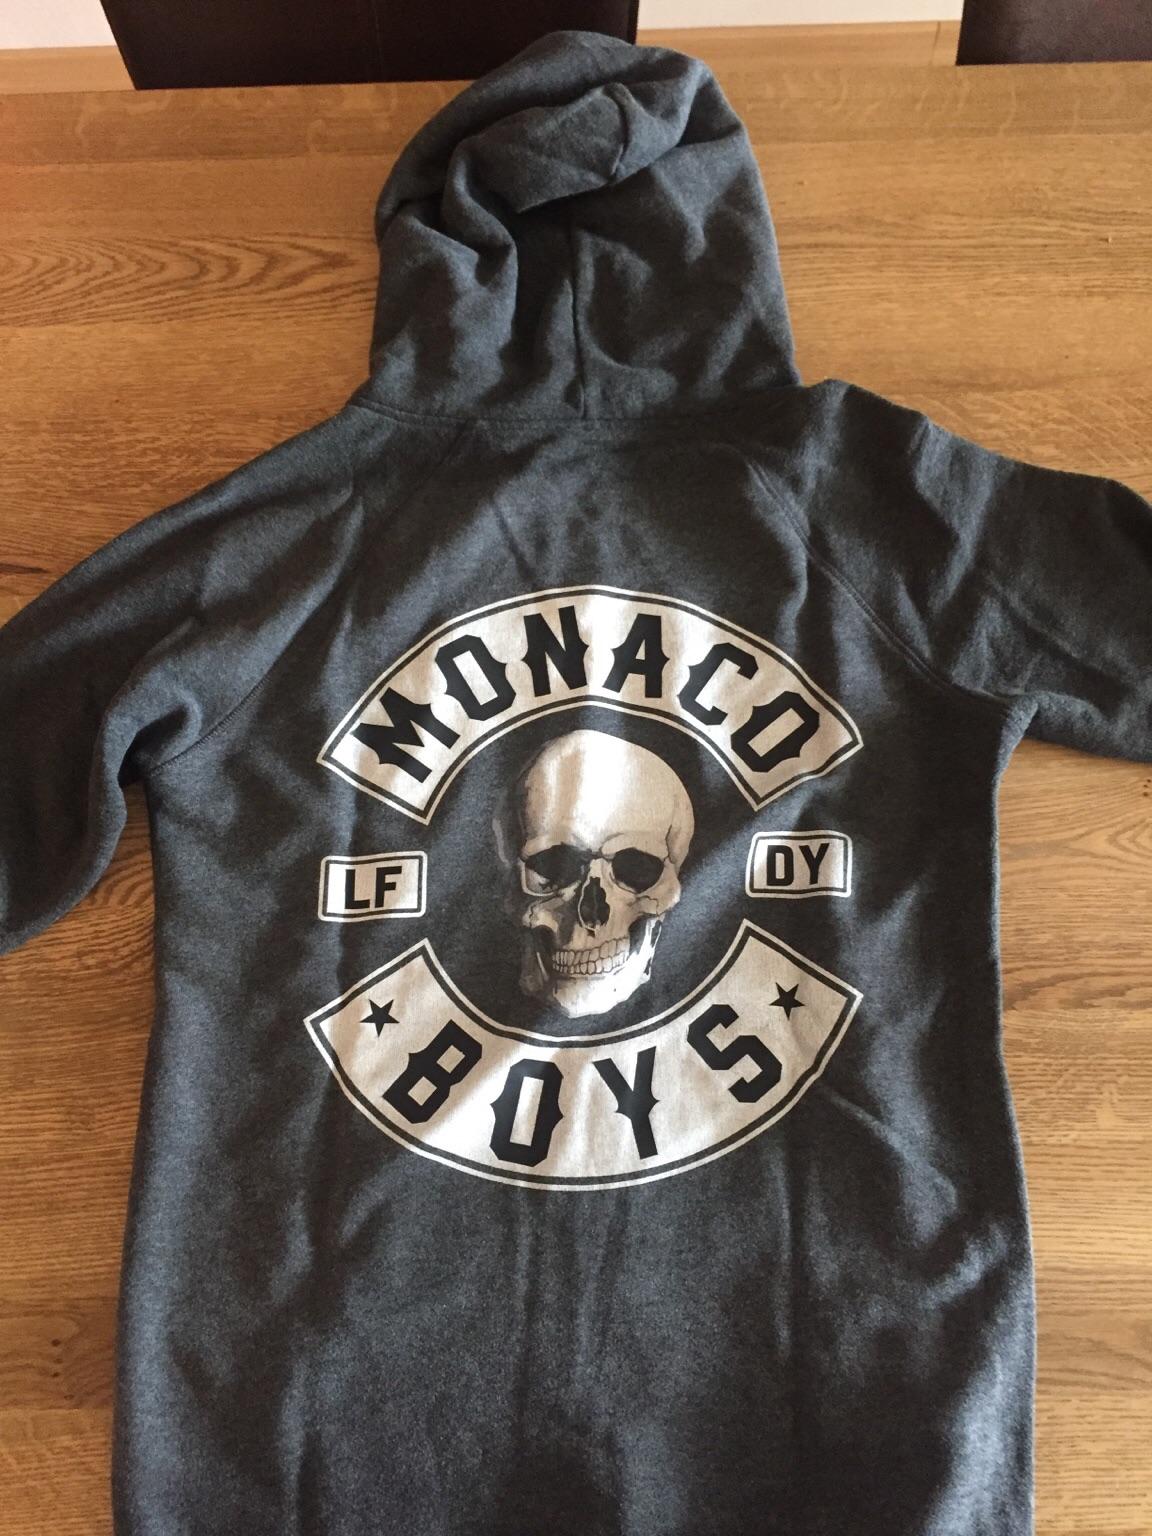 LFDY LIVE FAST DIE YOUNG Hoodie &quot;MONACO BOYS&quot; in 40878 Ratingen for €80.00 for sale | Shpock